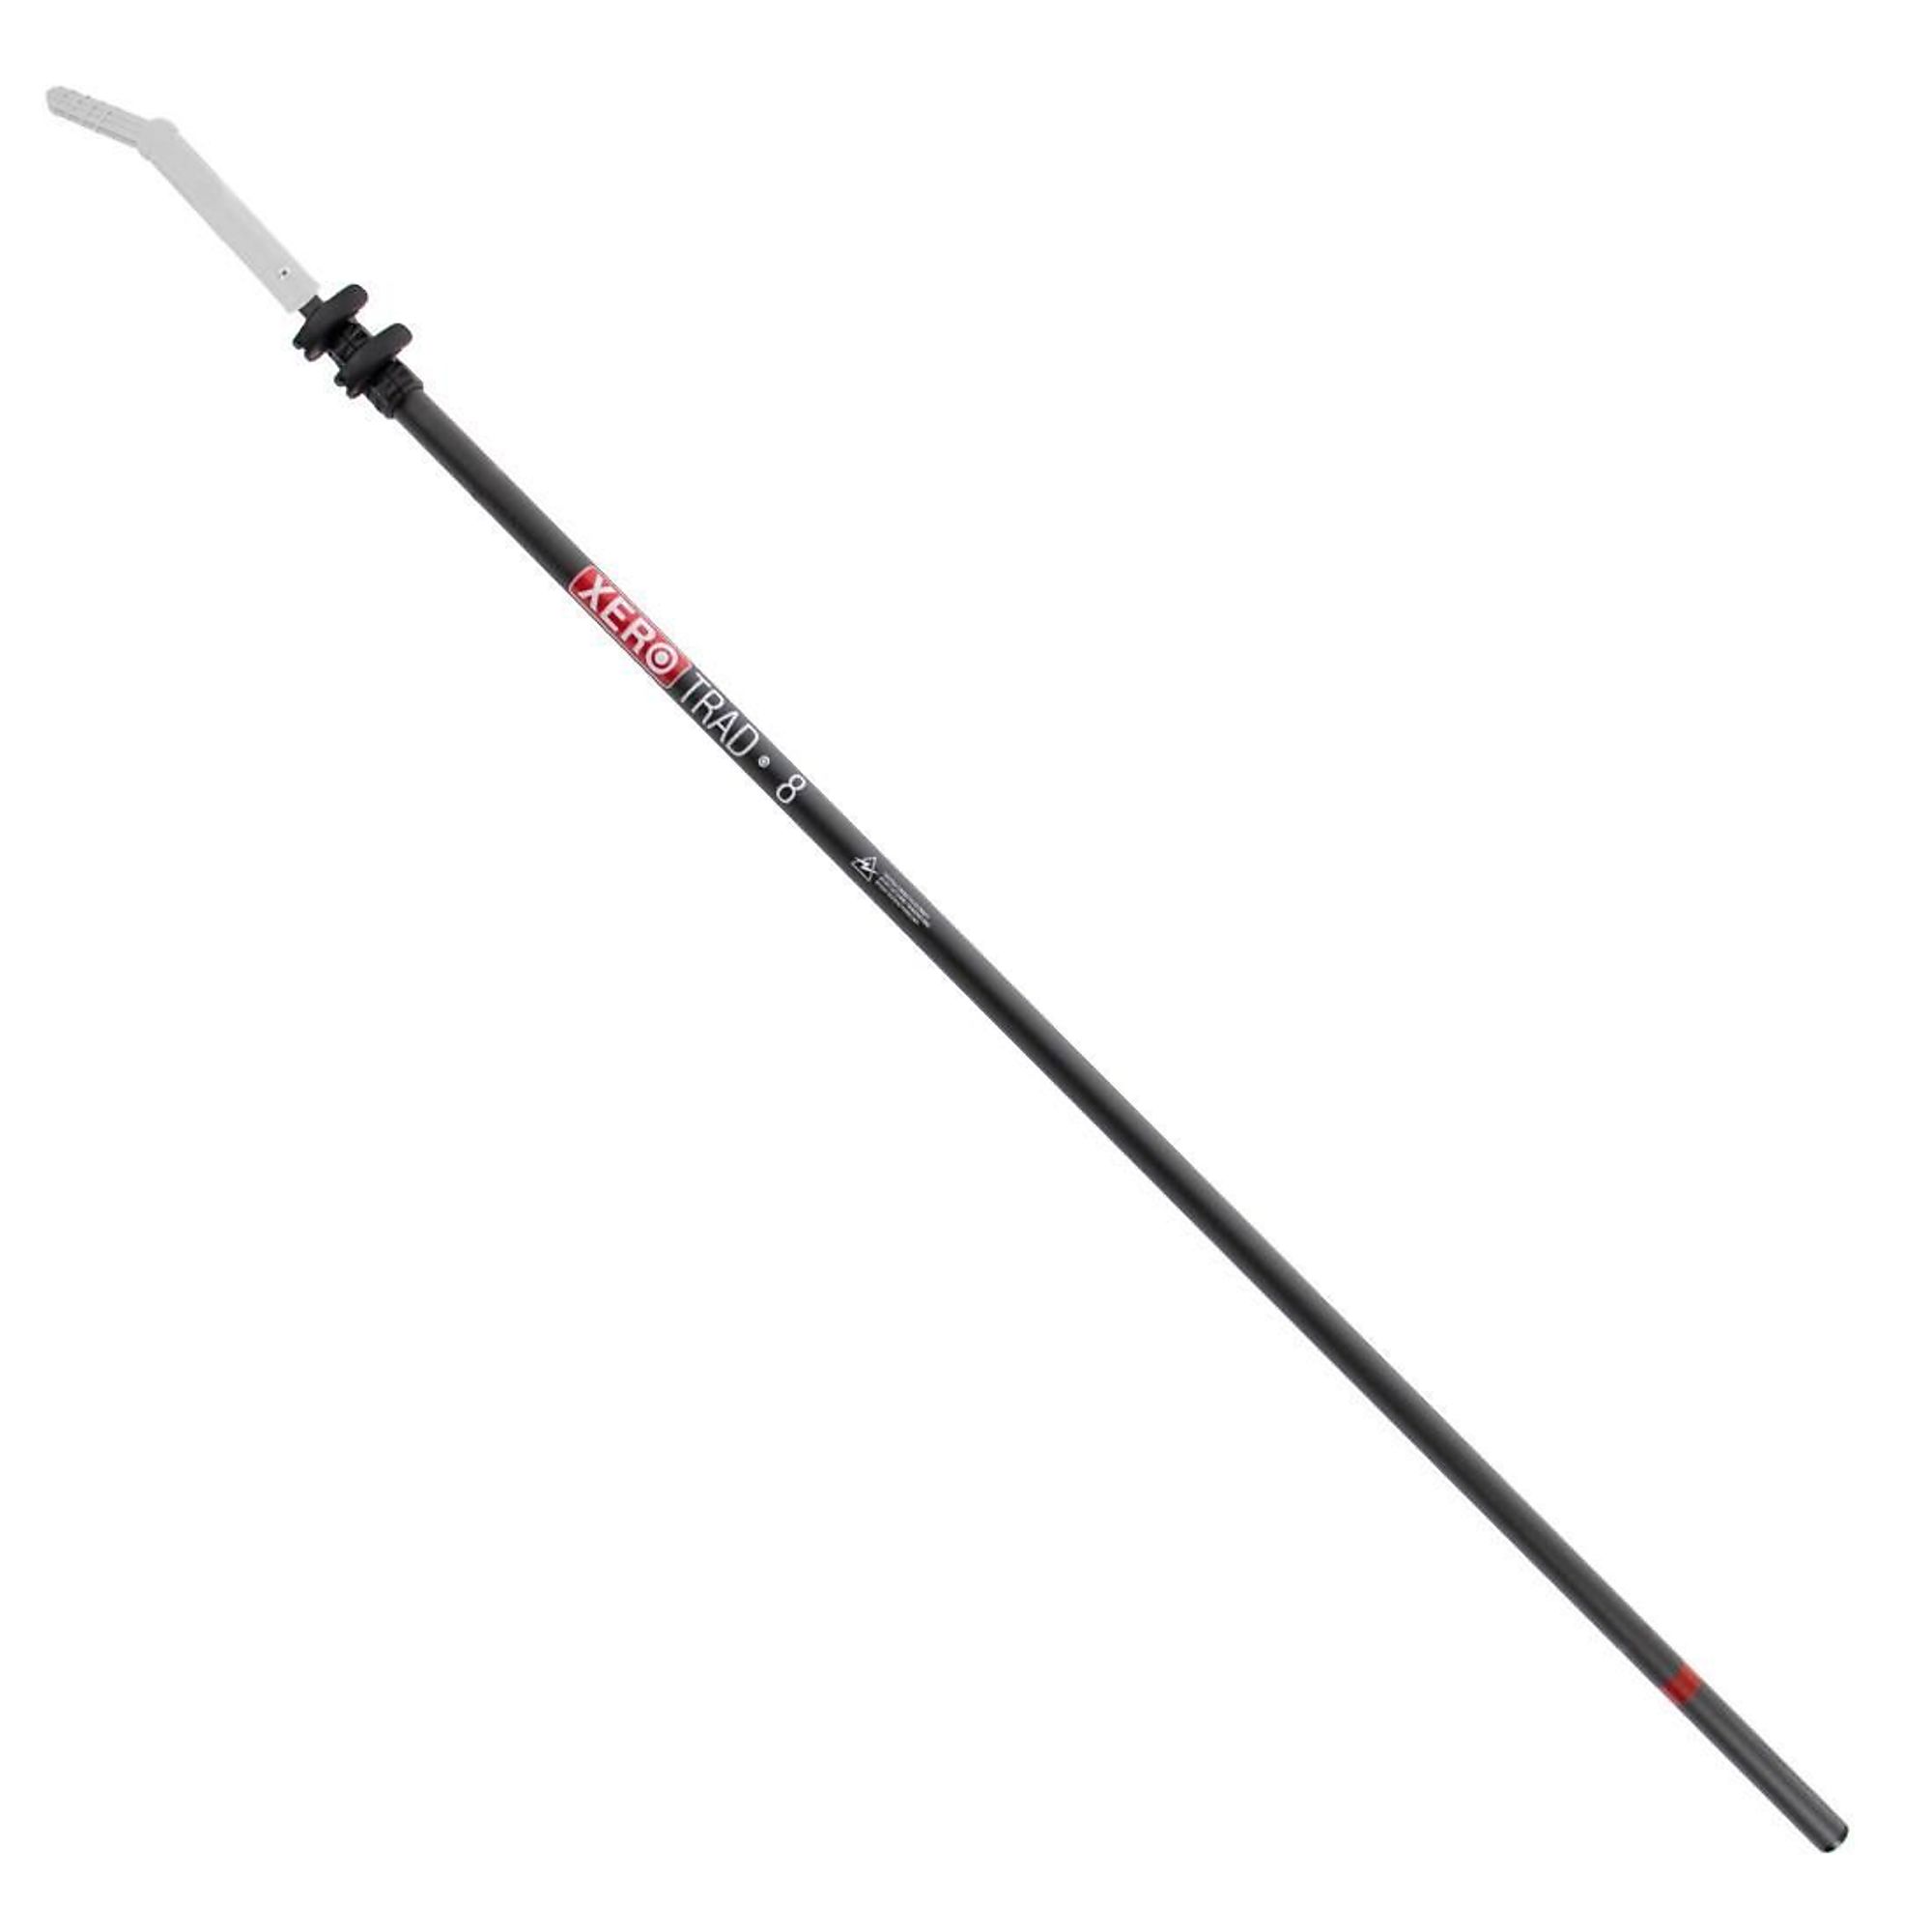 XERO, Trad Pole 2.0 Wagtail Tip - 8ft., Model 209-20-315